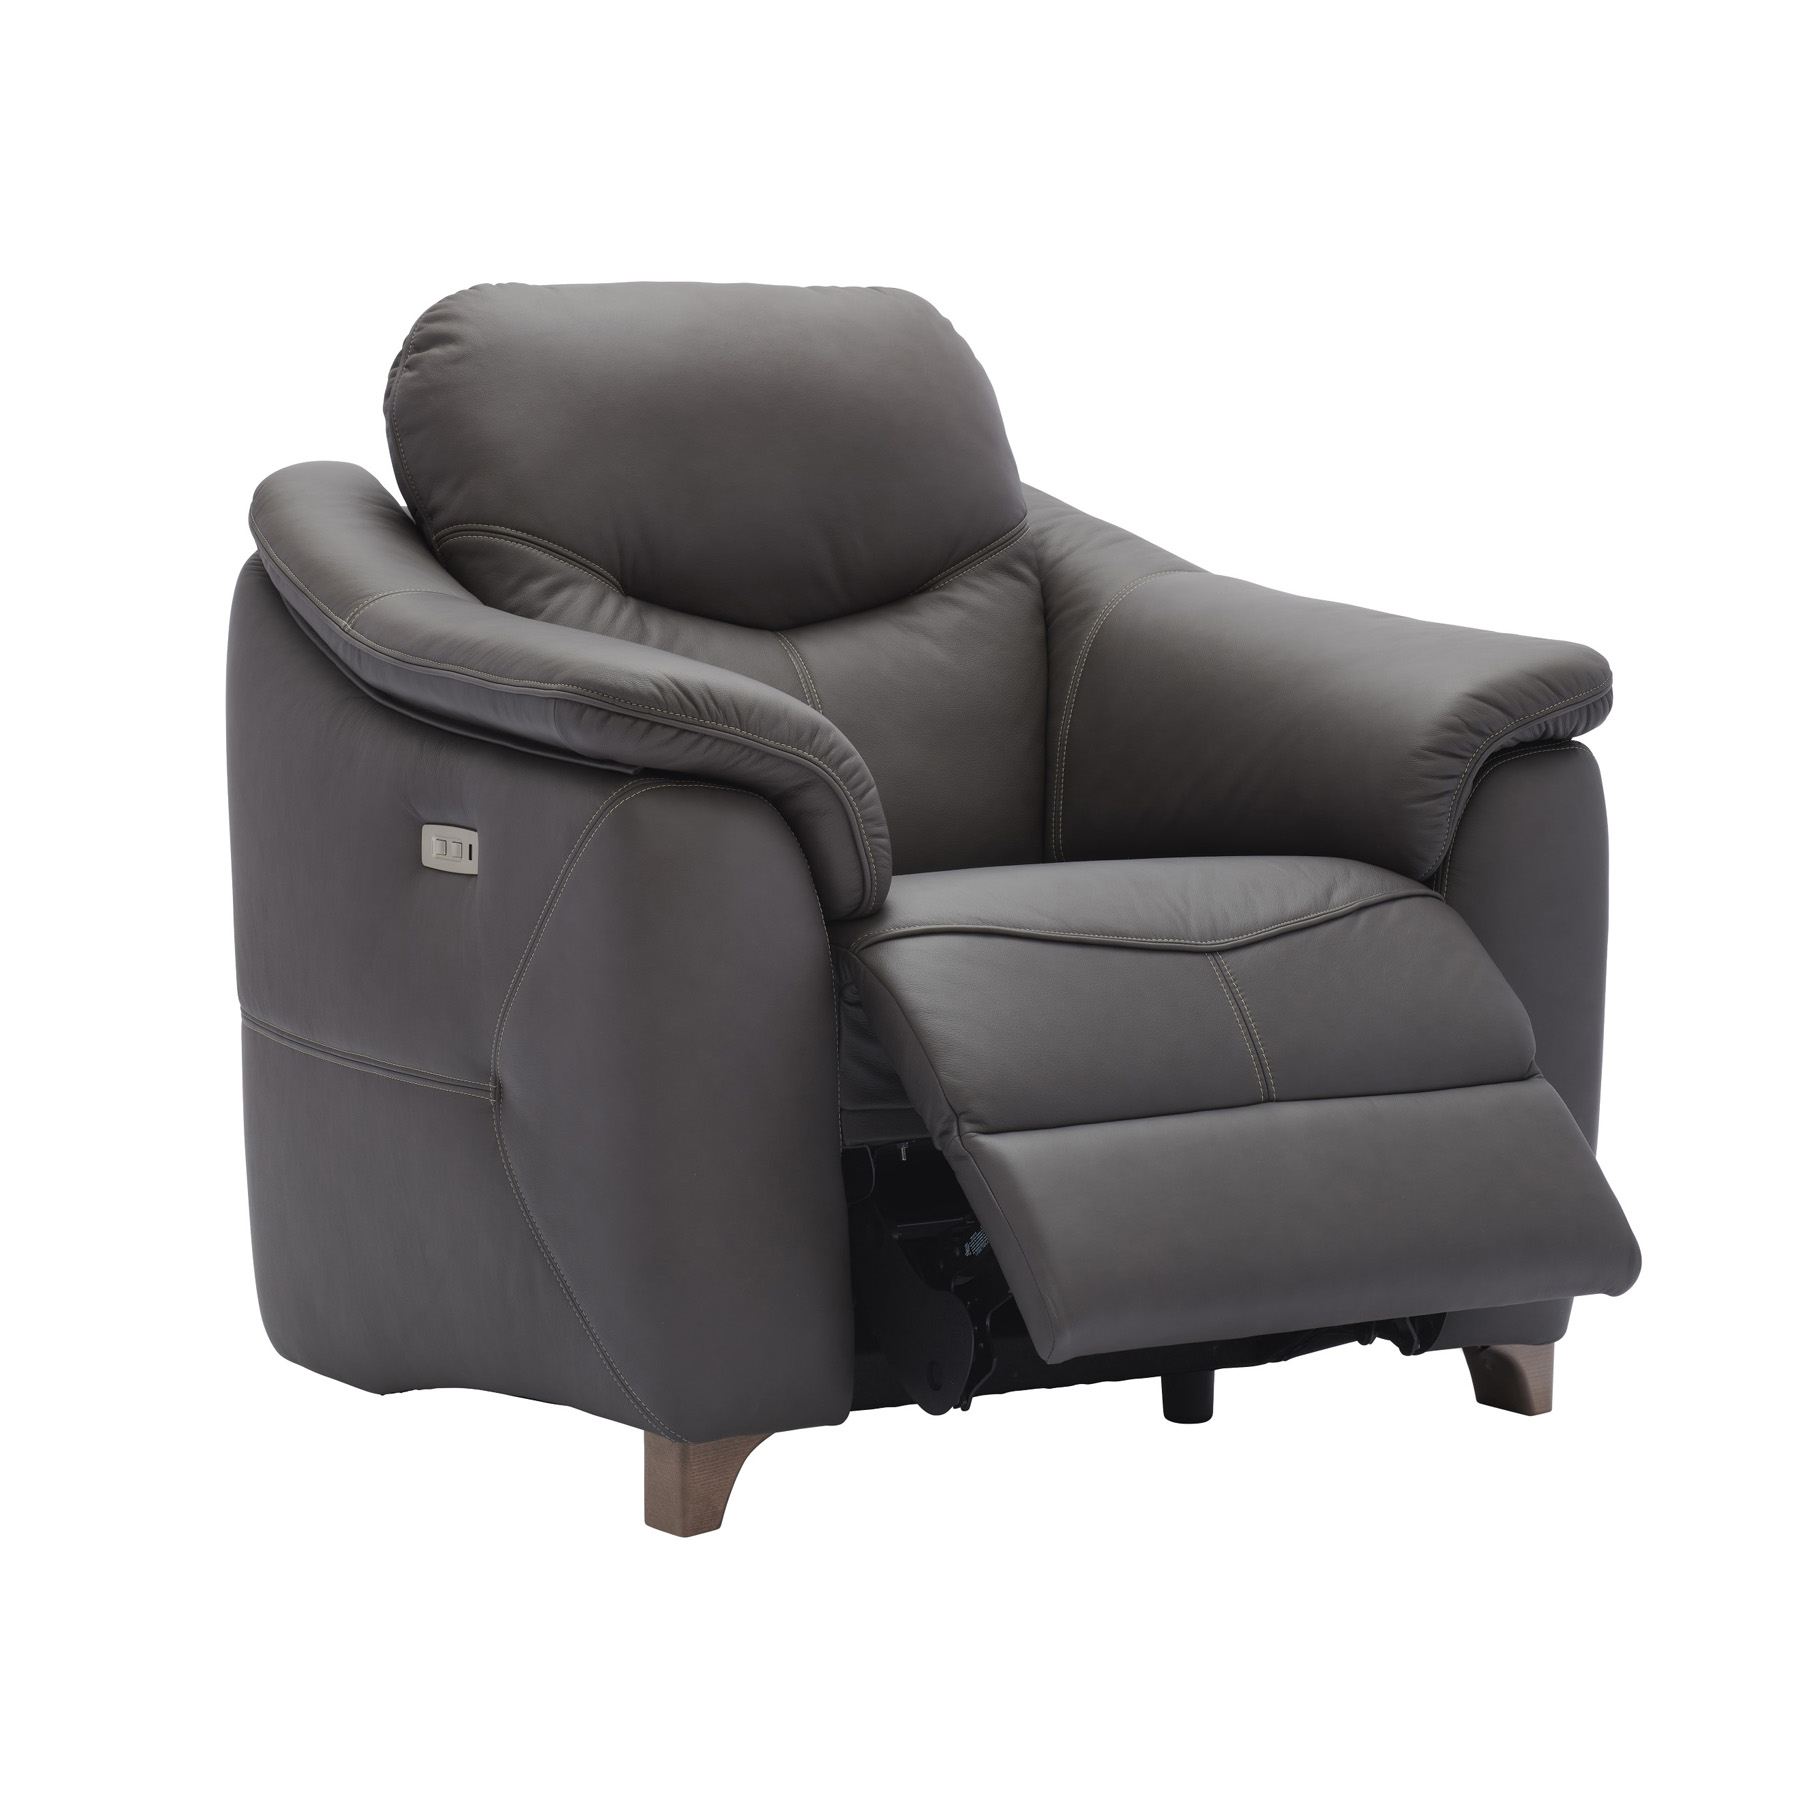 G Plan Jackson Leather Recliner Chair, Leather Chair Recliners